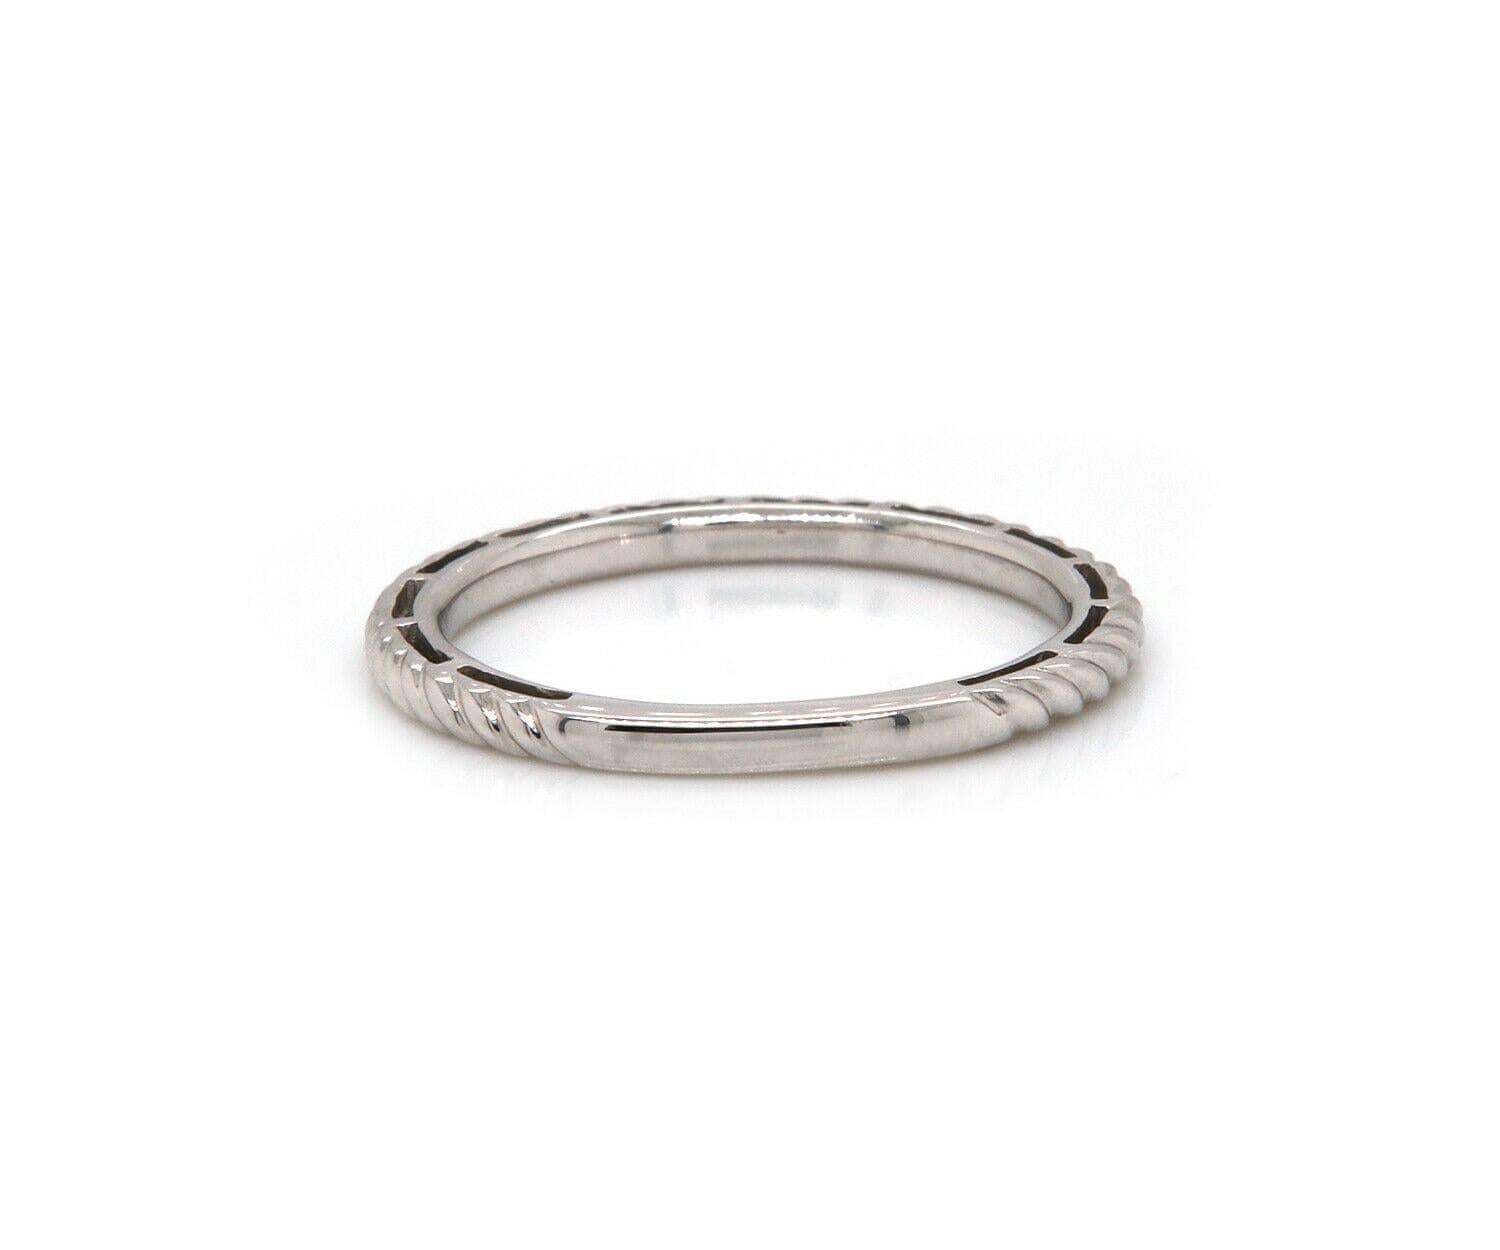 New Gabriel & Co. Twisted Rope Stackable Band Ring in 14K

Gabriel & Co. Twisted Rope Stackable Band Ring
14K White Gold
Band Width: Approx. 2.00 MM
Ring Size: 6.25 (US)
Weight: Approx. 1.80 Grams
Stamped: Gabriel & Co., 14K,